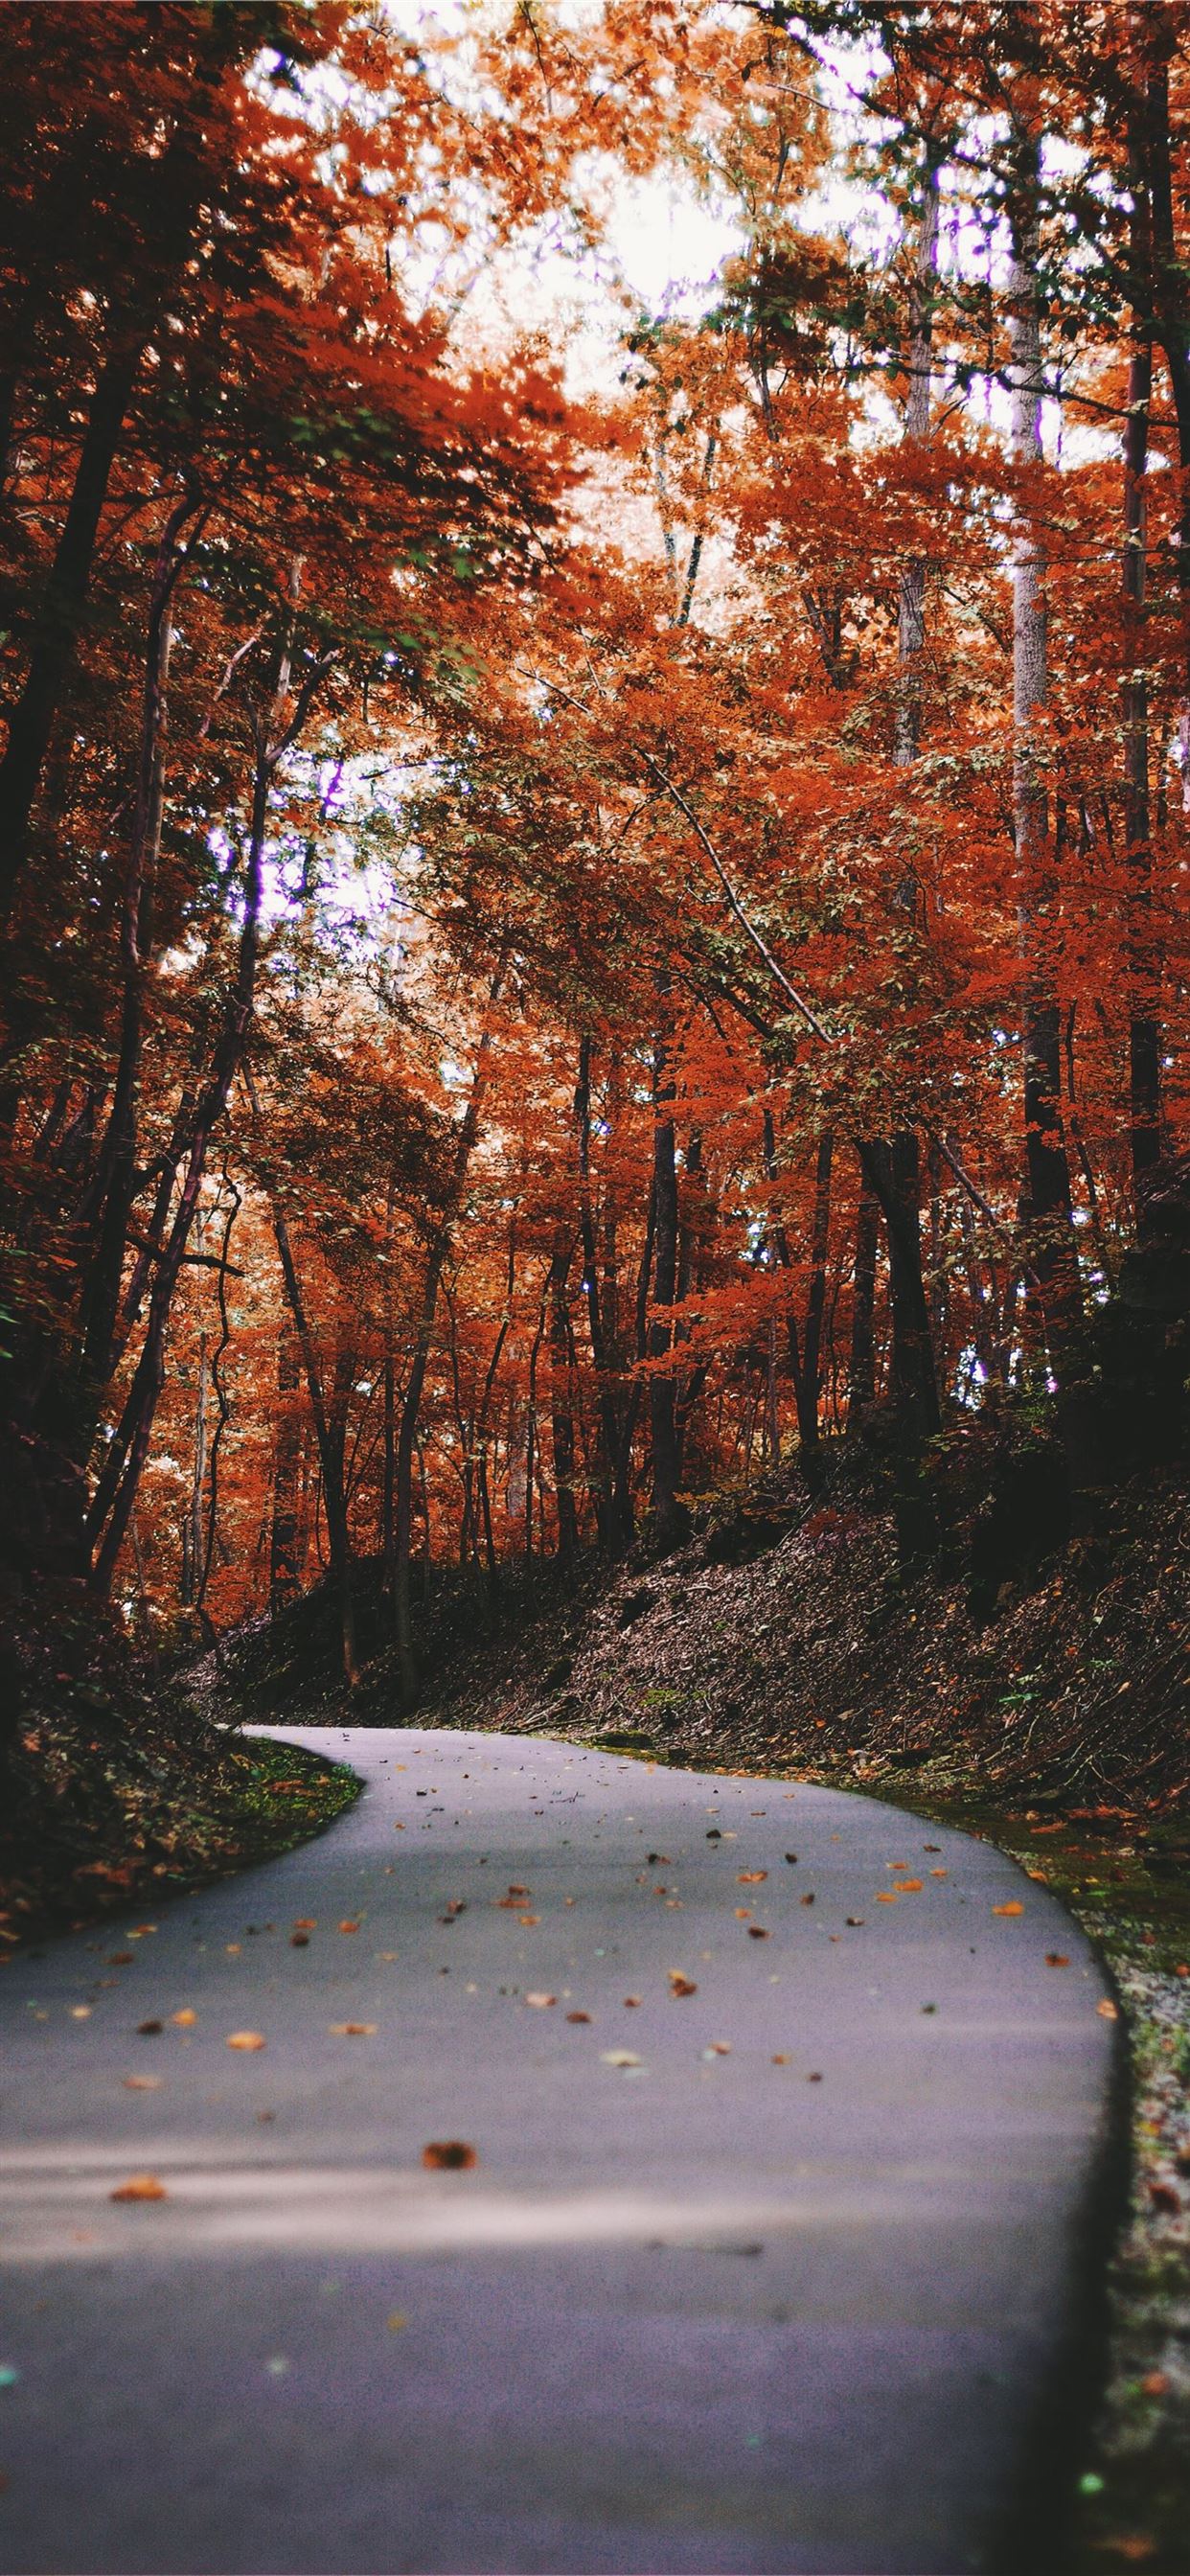 Autumn Iphone 11 Pro Max Wallpapers